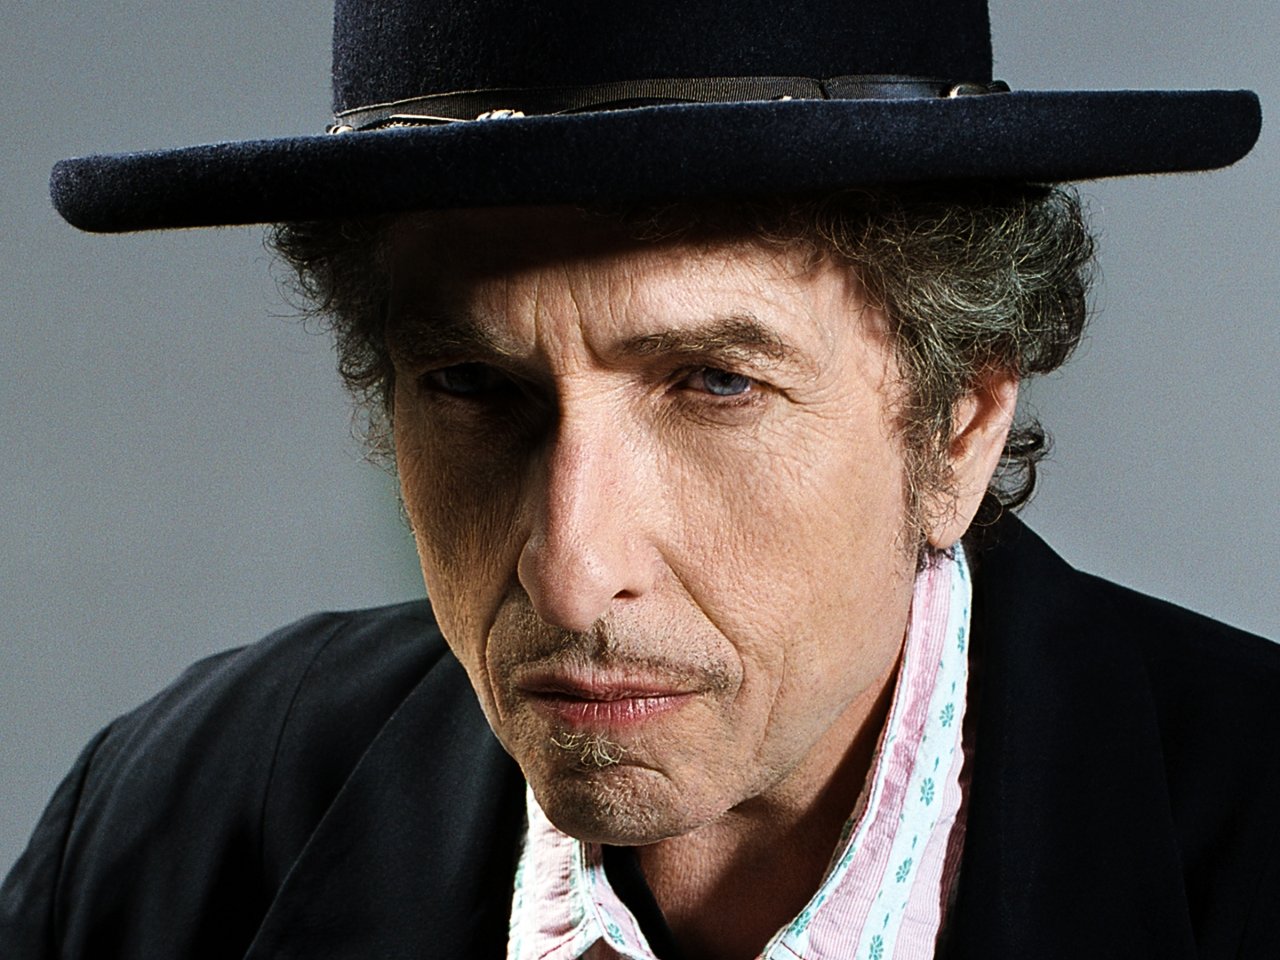 Bob Dylan, Once a Political Singer-Songwriter, to Release 3 CDs of Crooning Classic Songs